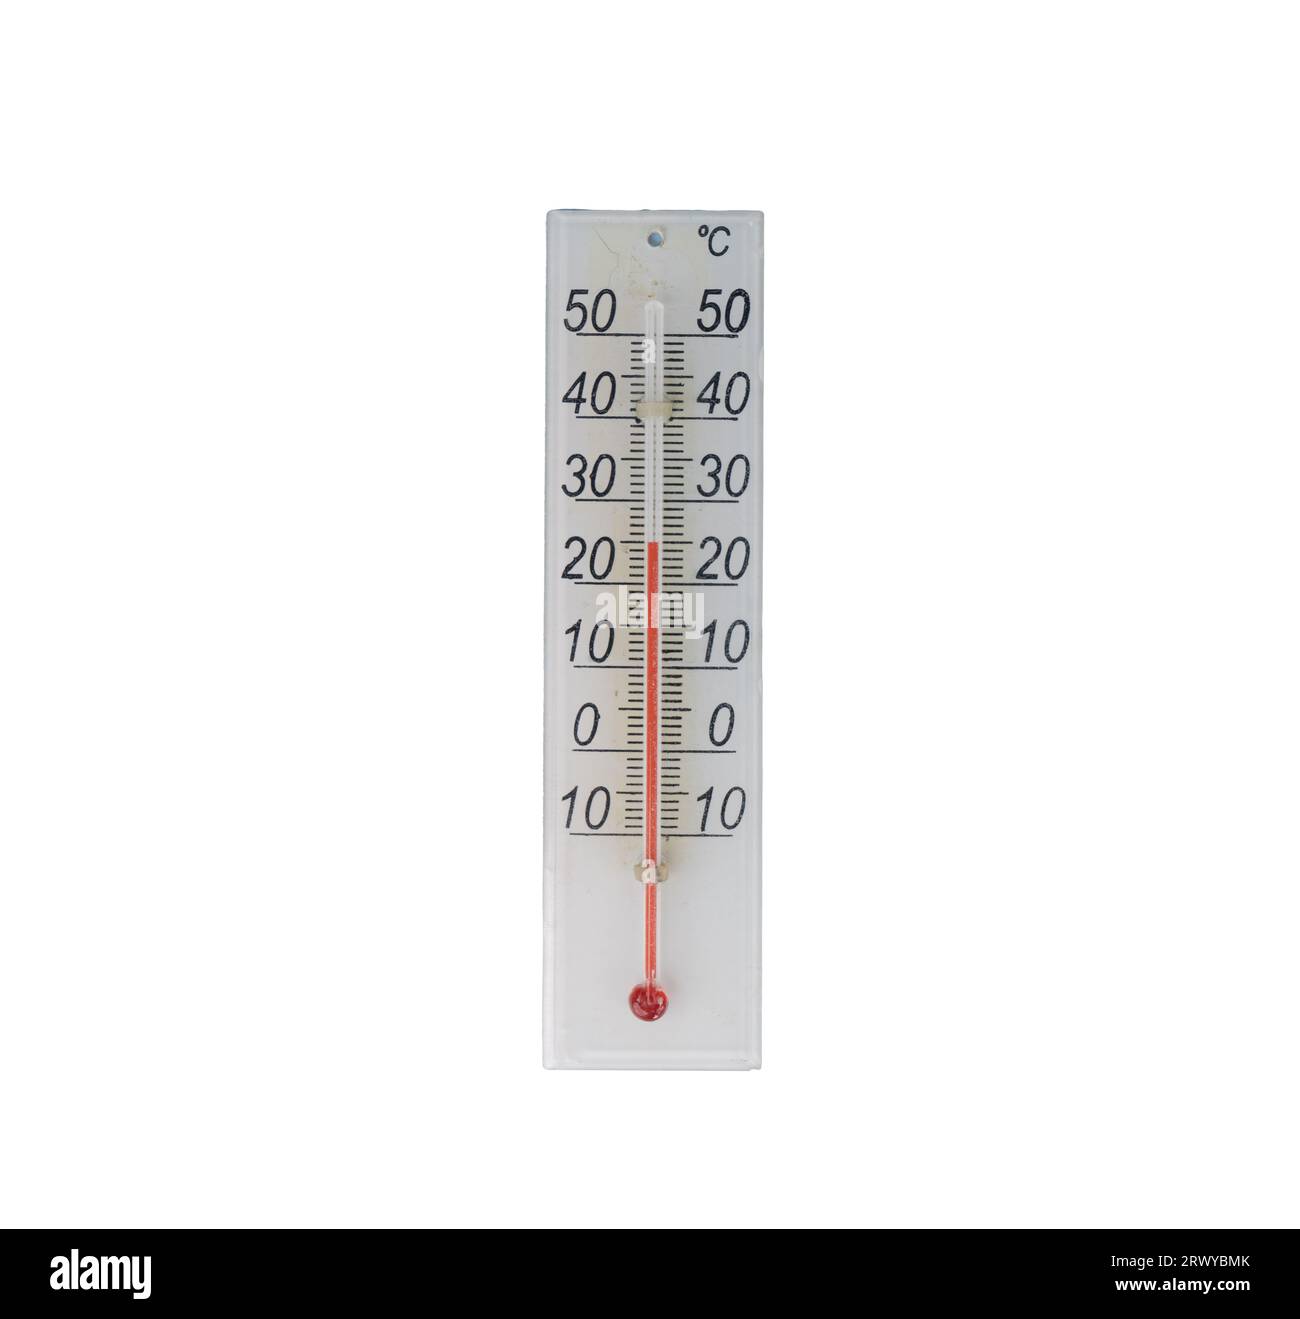 1,557 Analog Thermometer Images, Stock Photos, 3D objects